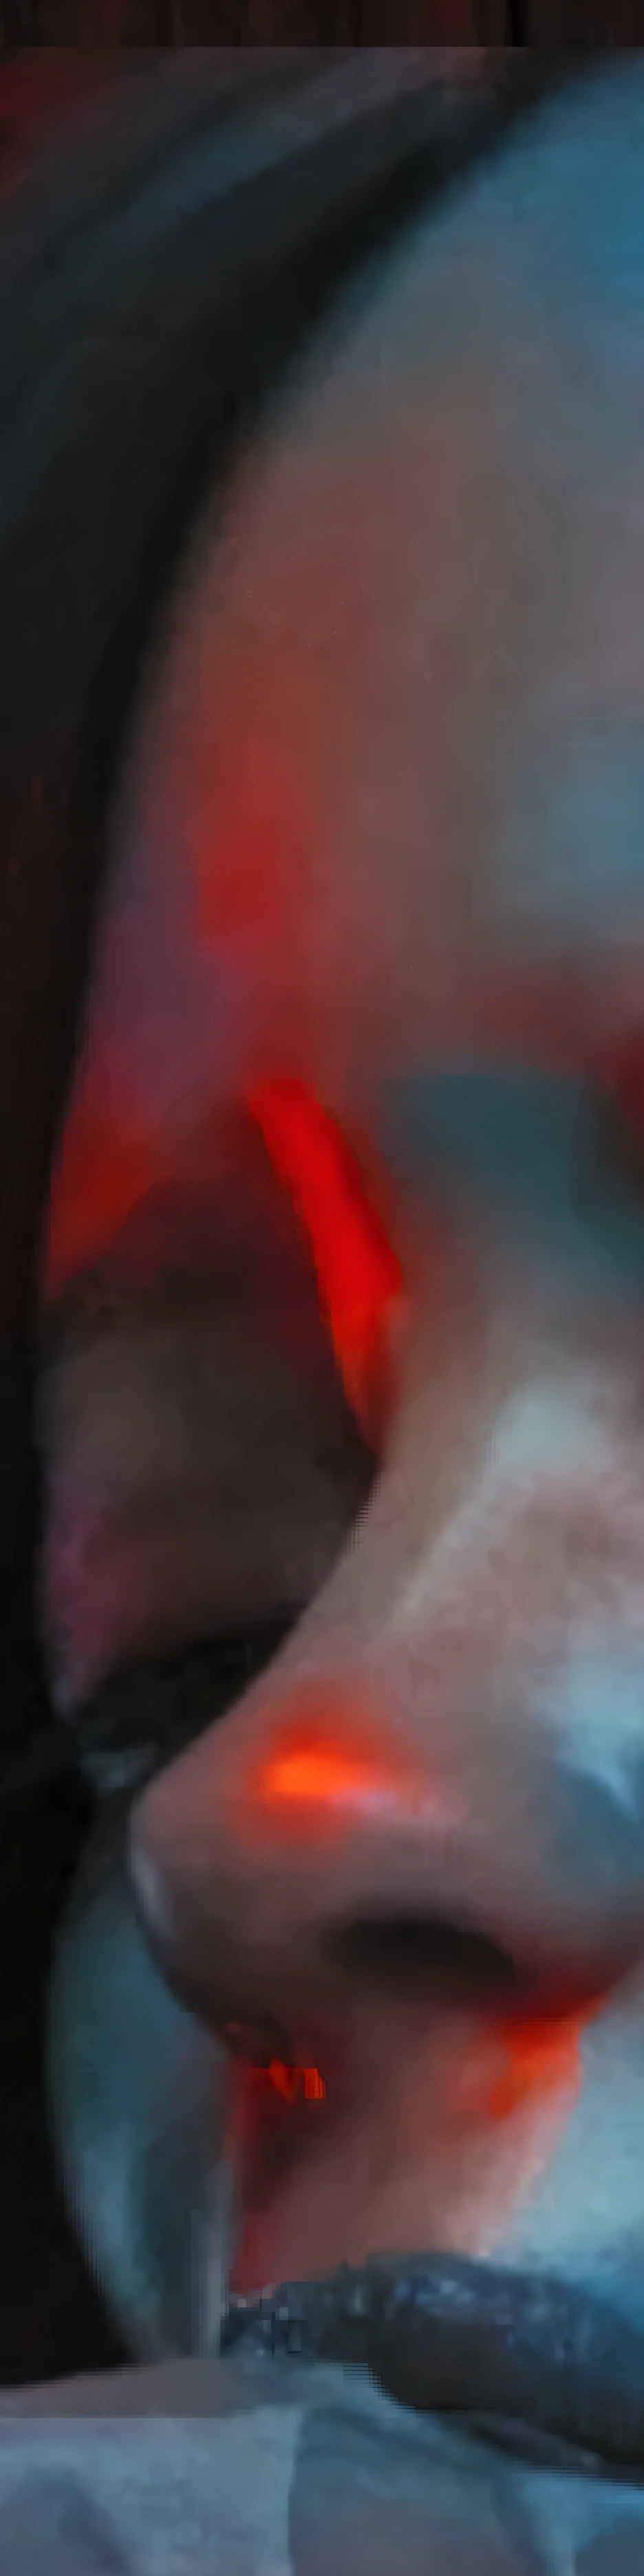 there is a woman with blue eyes and a red nose, flames around body, heavy jpeg artifact blurry, body with black and red lava, neon edges on bottom of body, very very low quality picture, obscured underexposed view, shoulders can be seen, movie scene close up, upper body visible, neck visible, grainy low quality, neck zoomed in